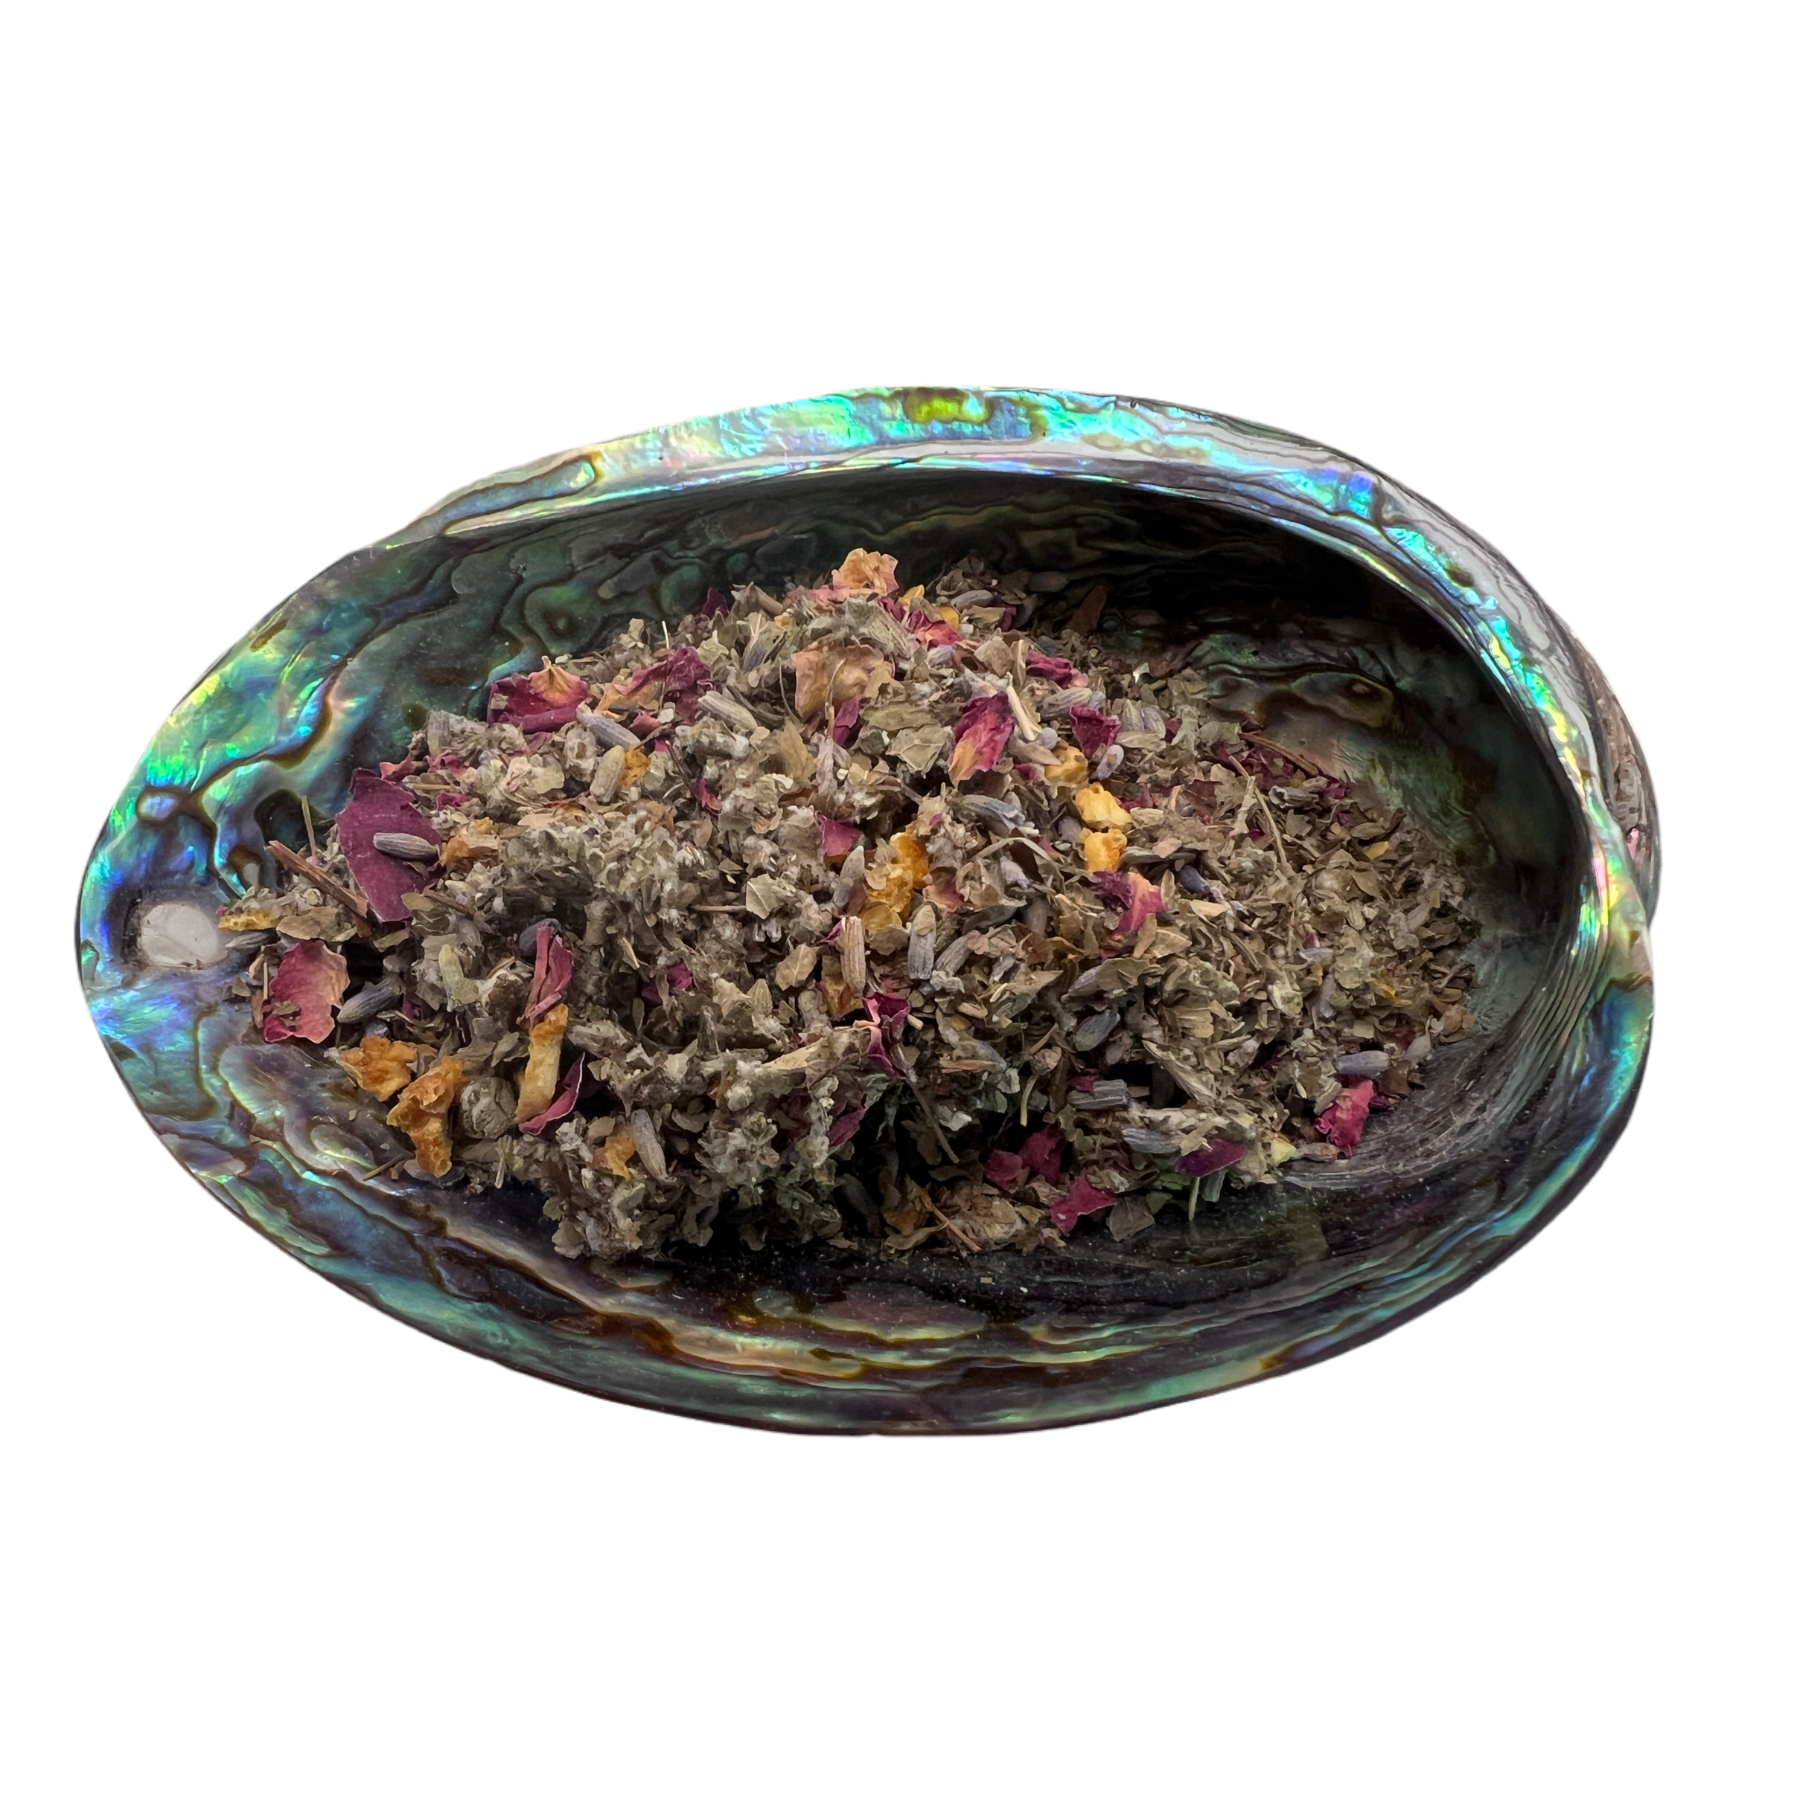 Dried mixed herbs named Goddess Blend Tea placed on a colorful shell bowl